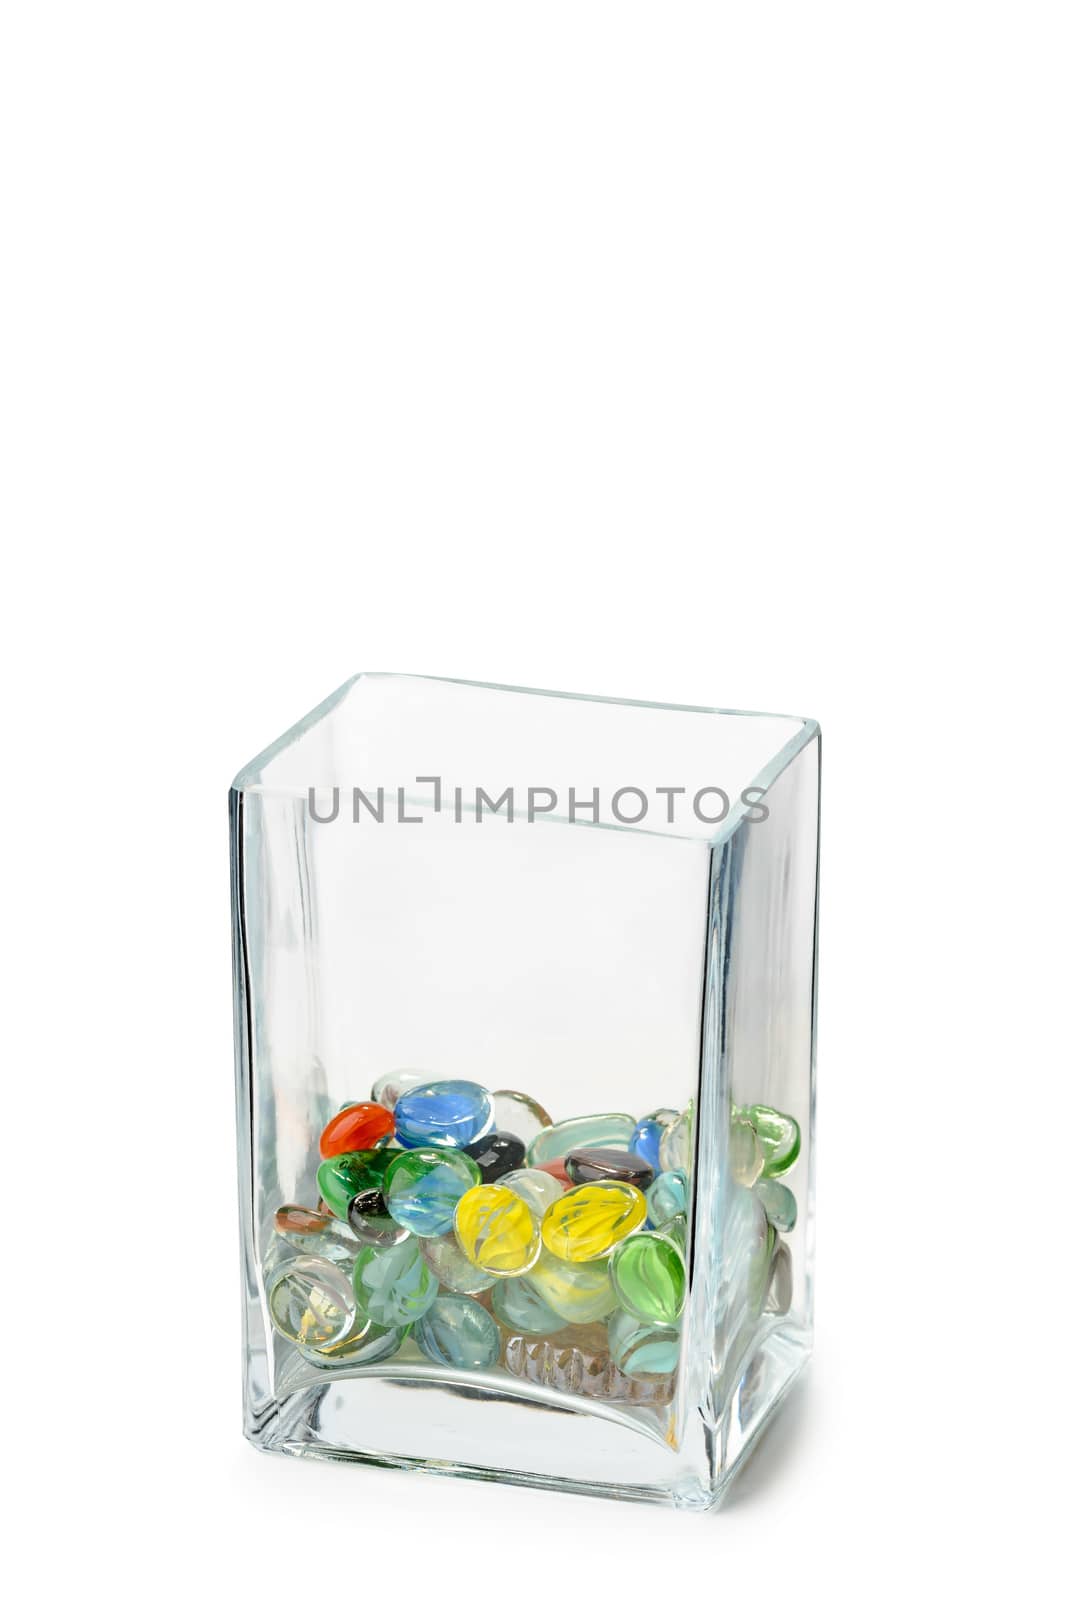 A Parallelepipedic transparent crystal vase isolated on white background, half full of colored glass beads